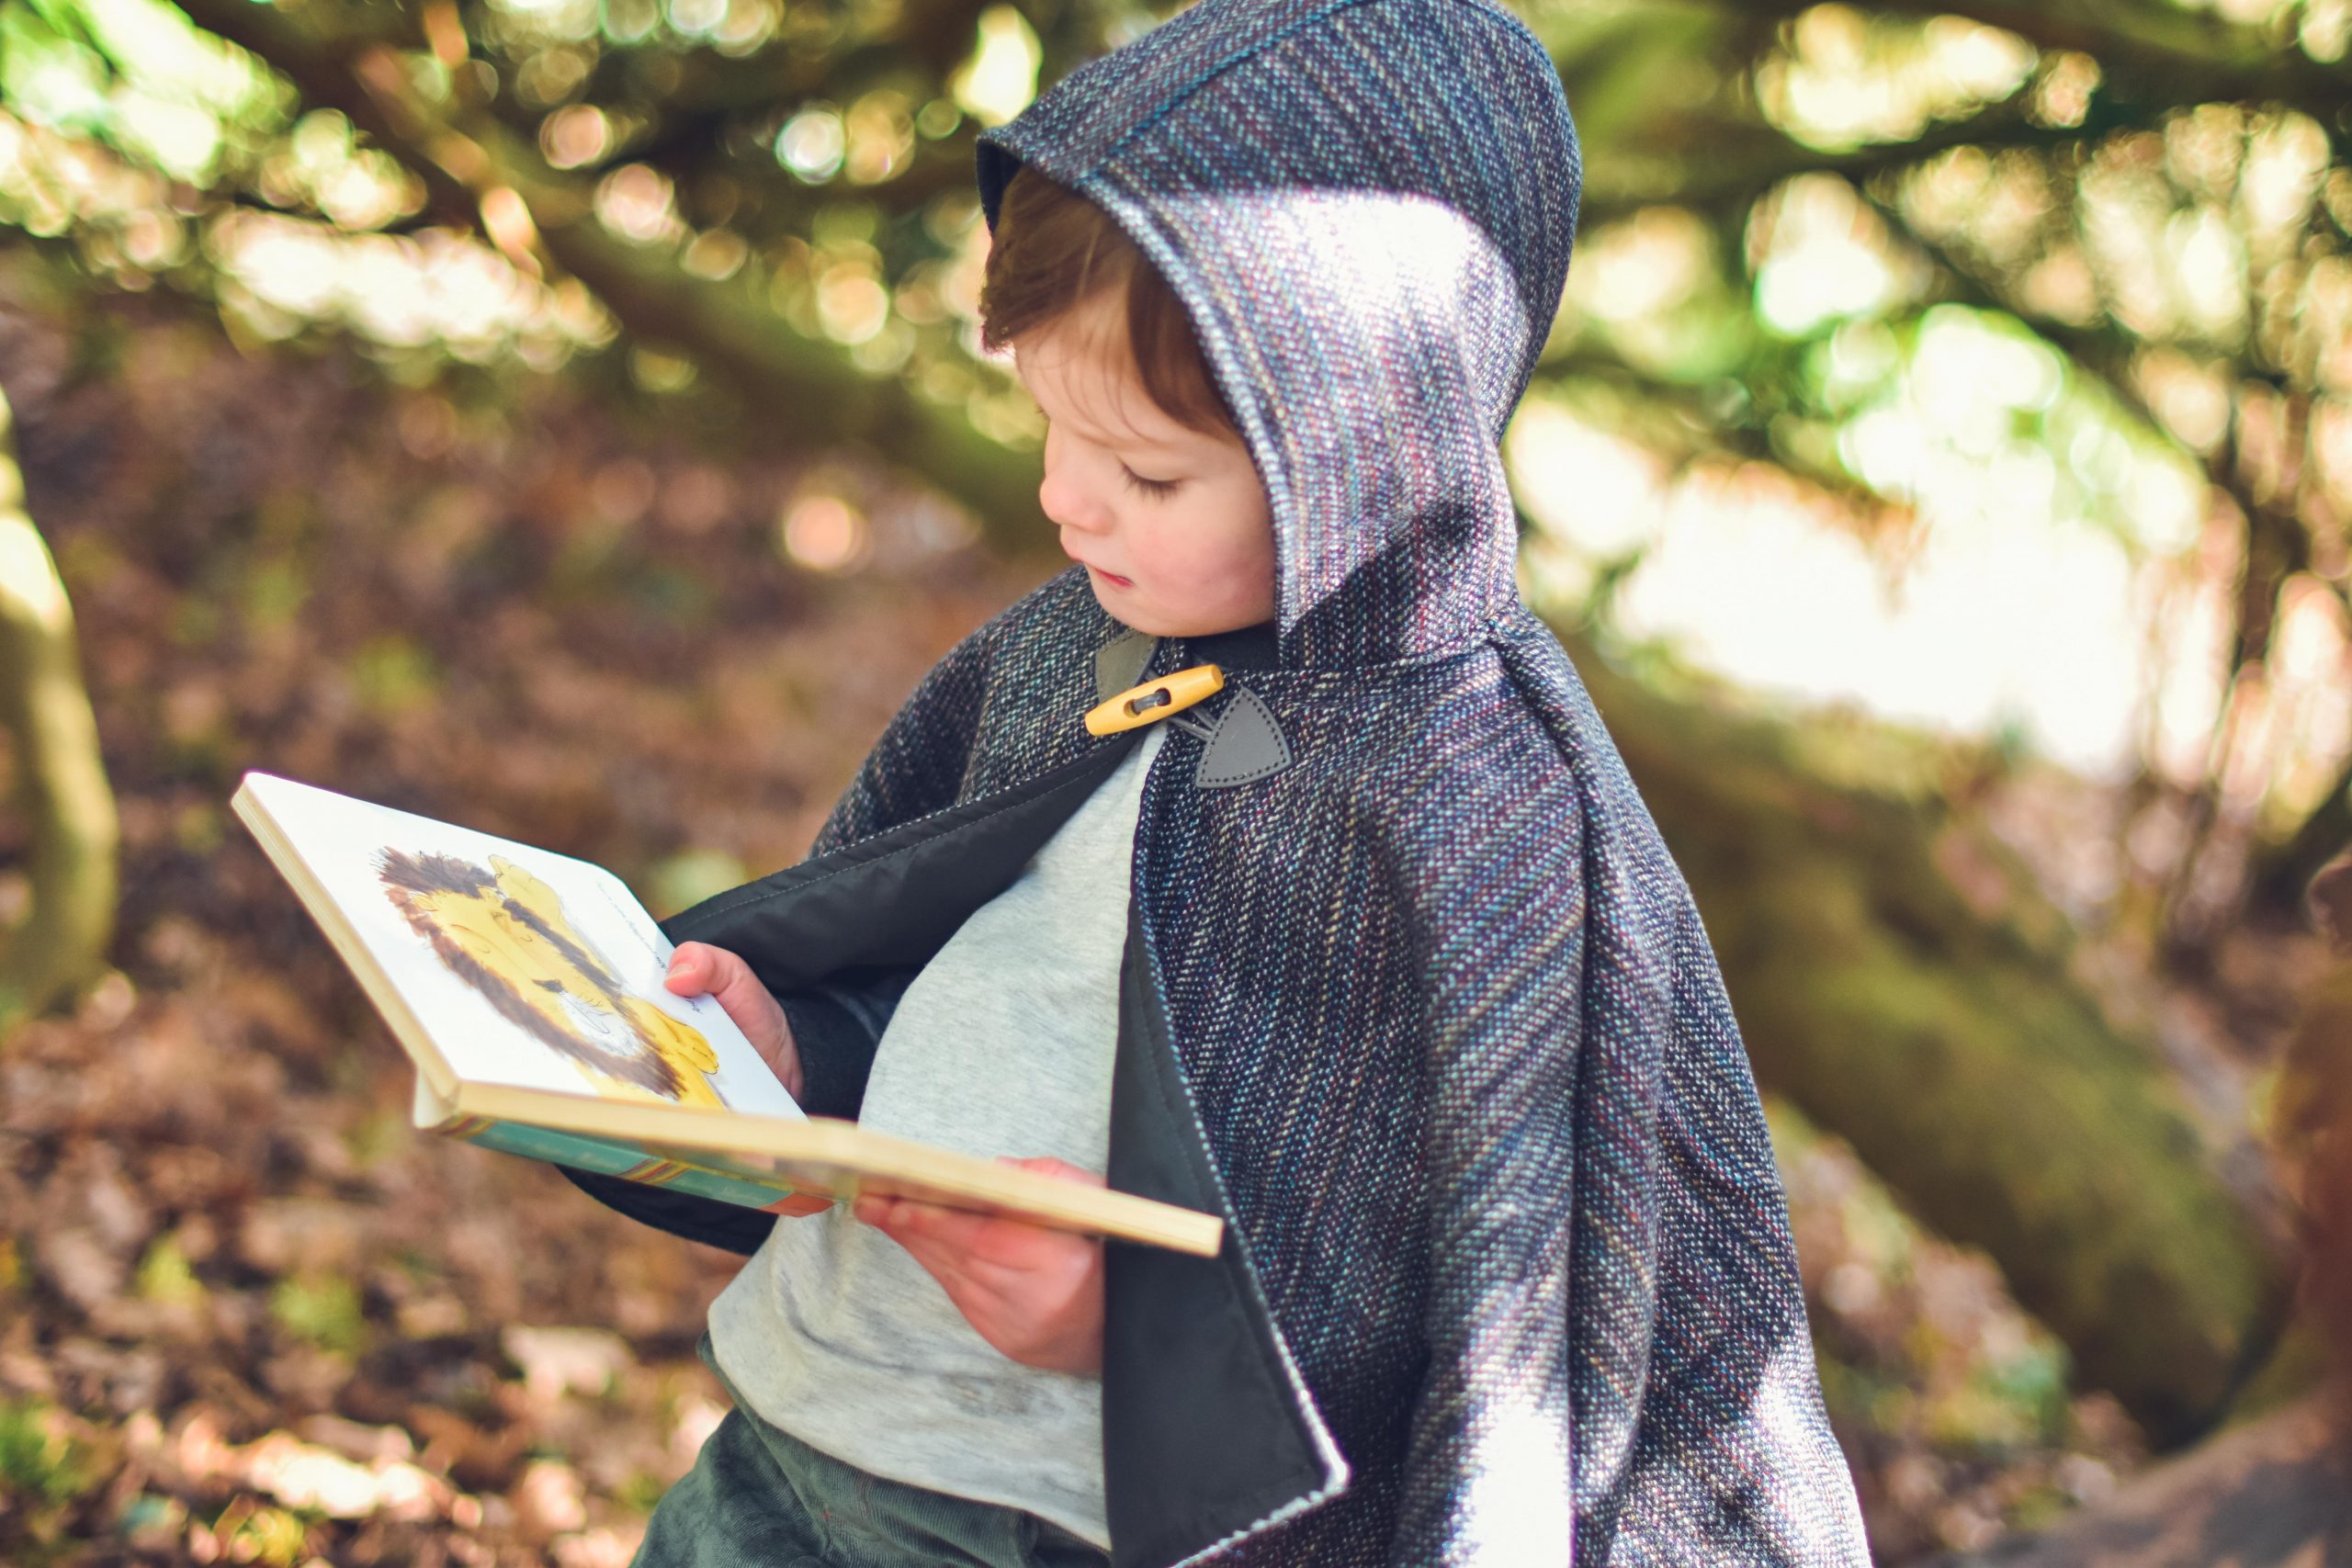 Waves and Wild Storybook Cape boy wearing grey cape reading book